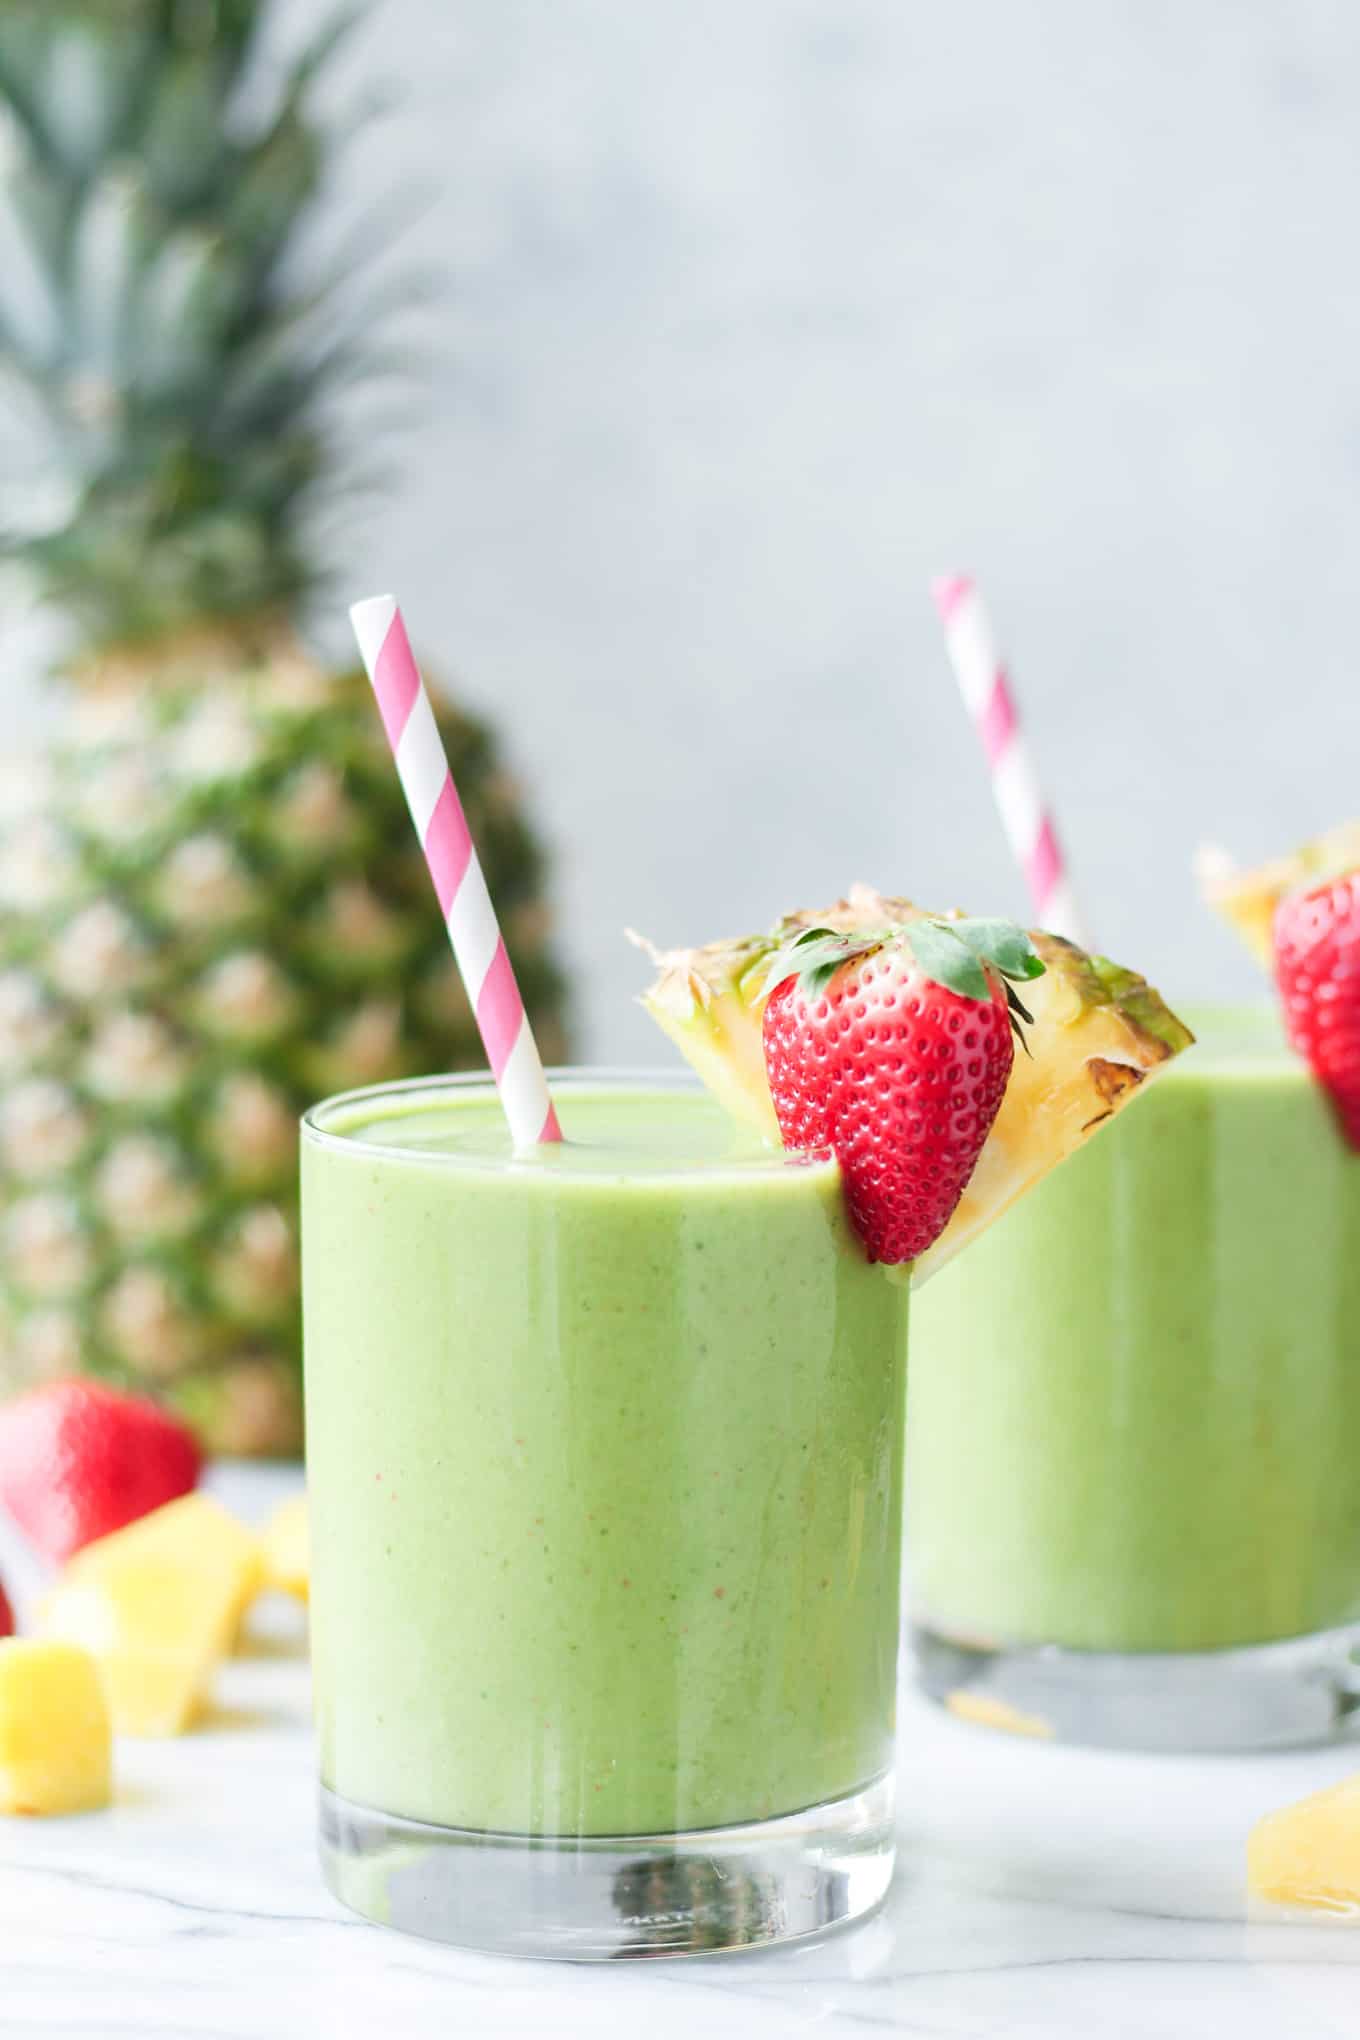 A close up view of the Tropical Island Green Smoothie in a glass with a strawberry and pineapple slice decorating the rim.